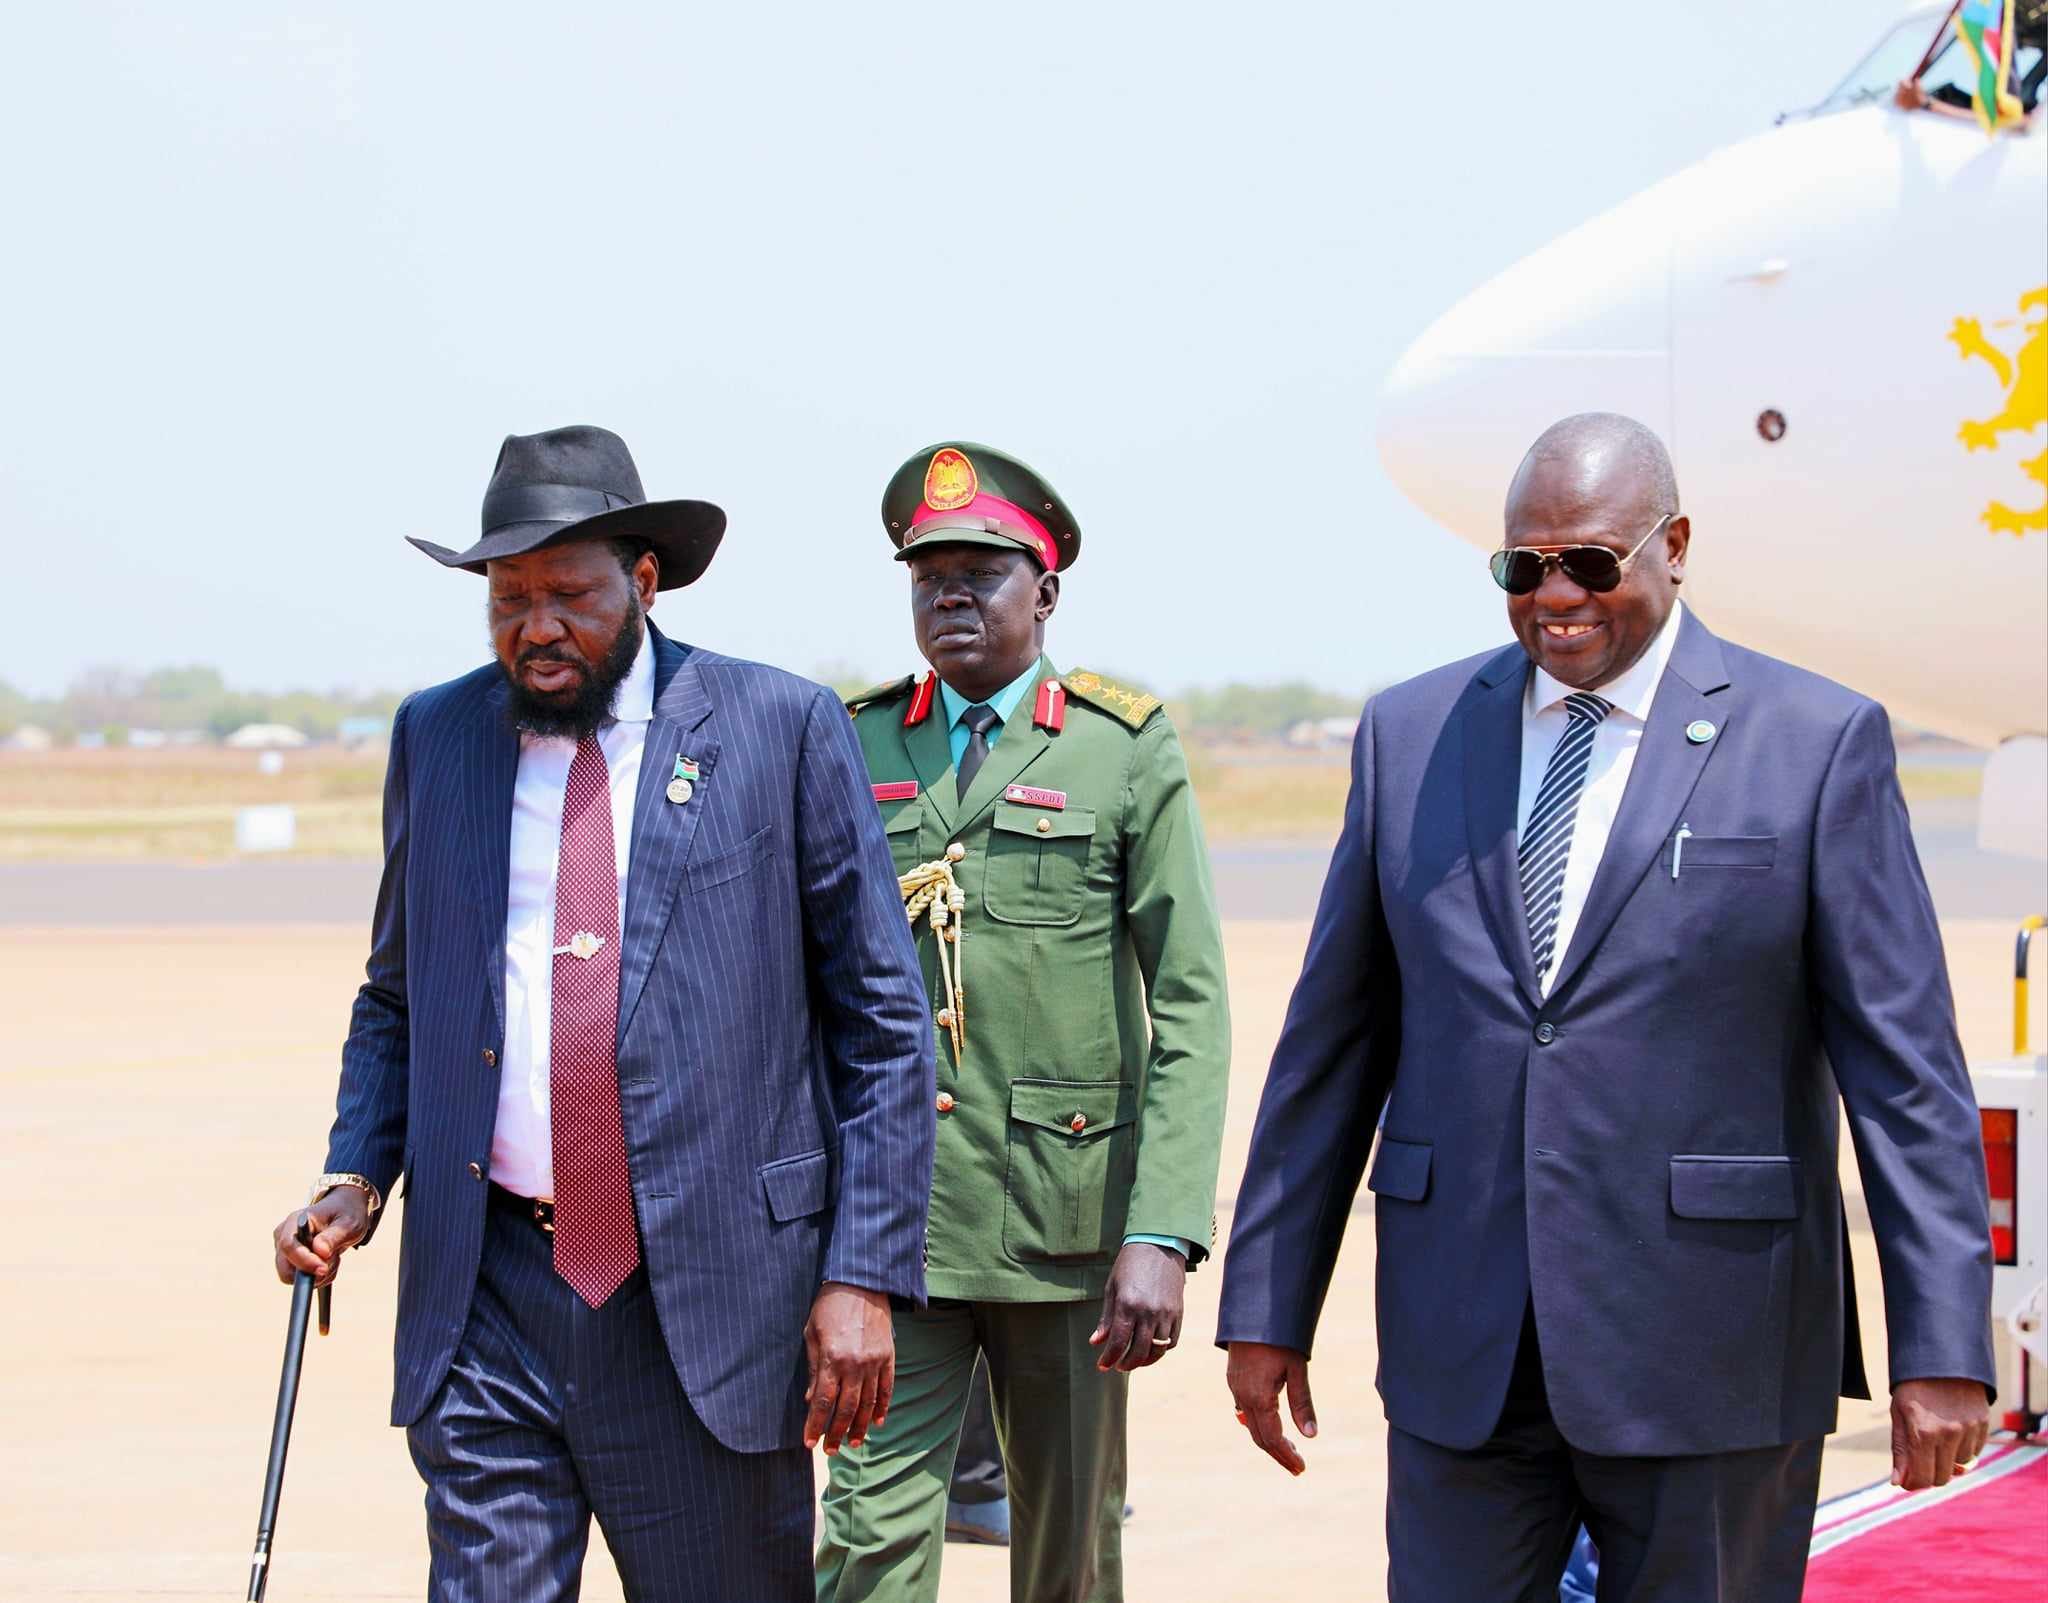 Kiir urges Great Lakes region to find amicable solution to conflicts